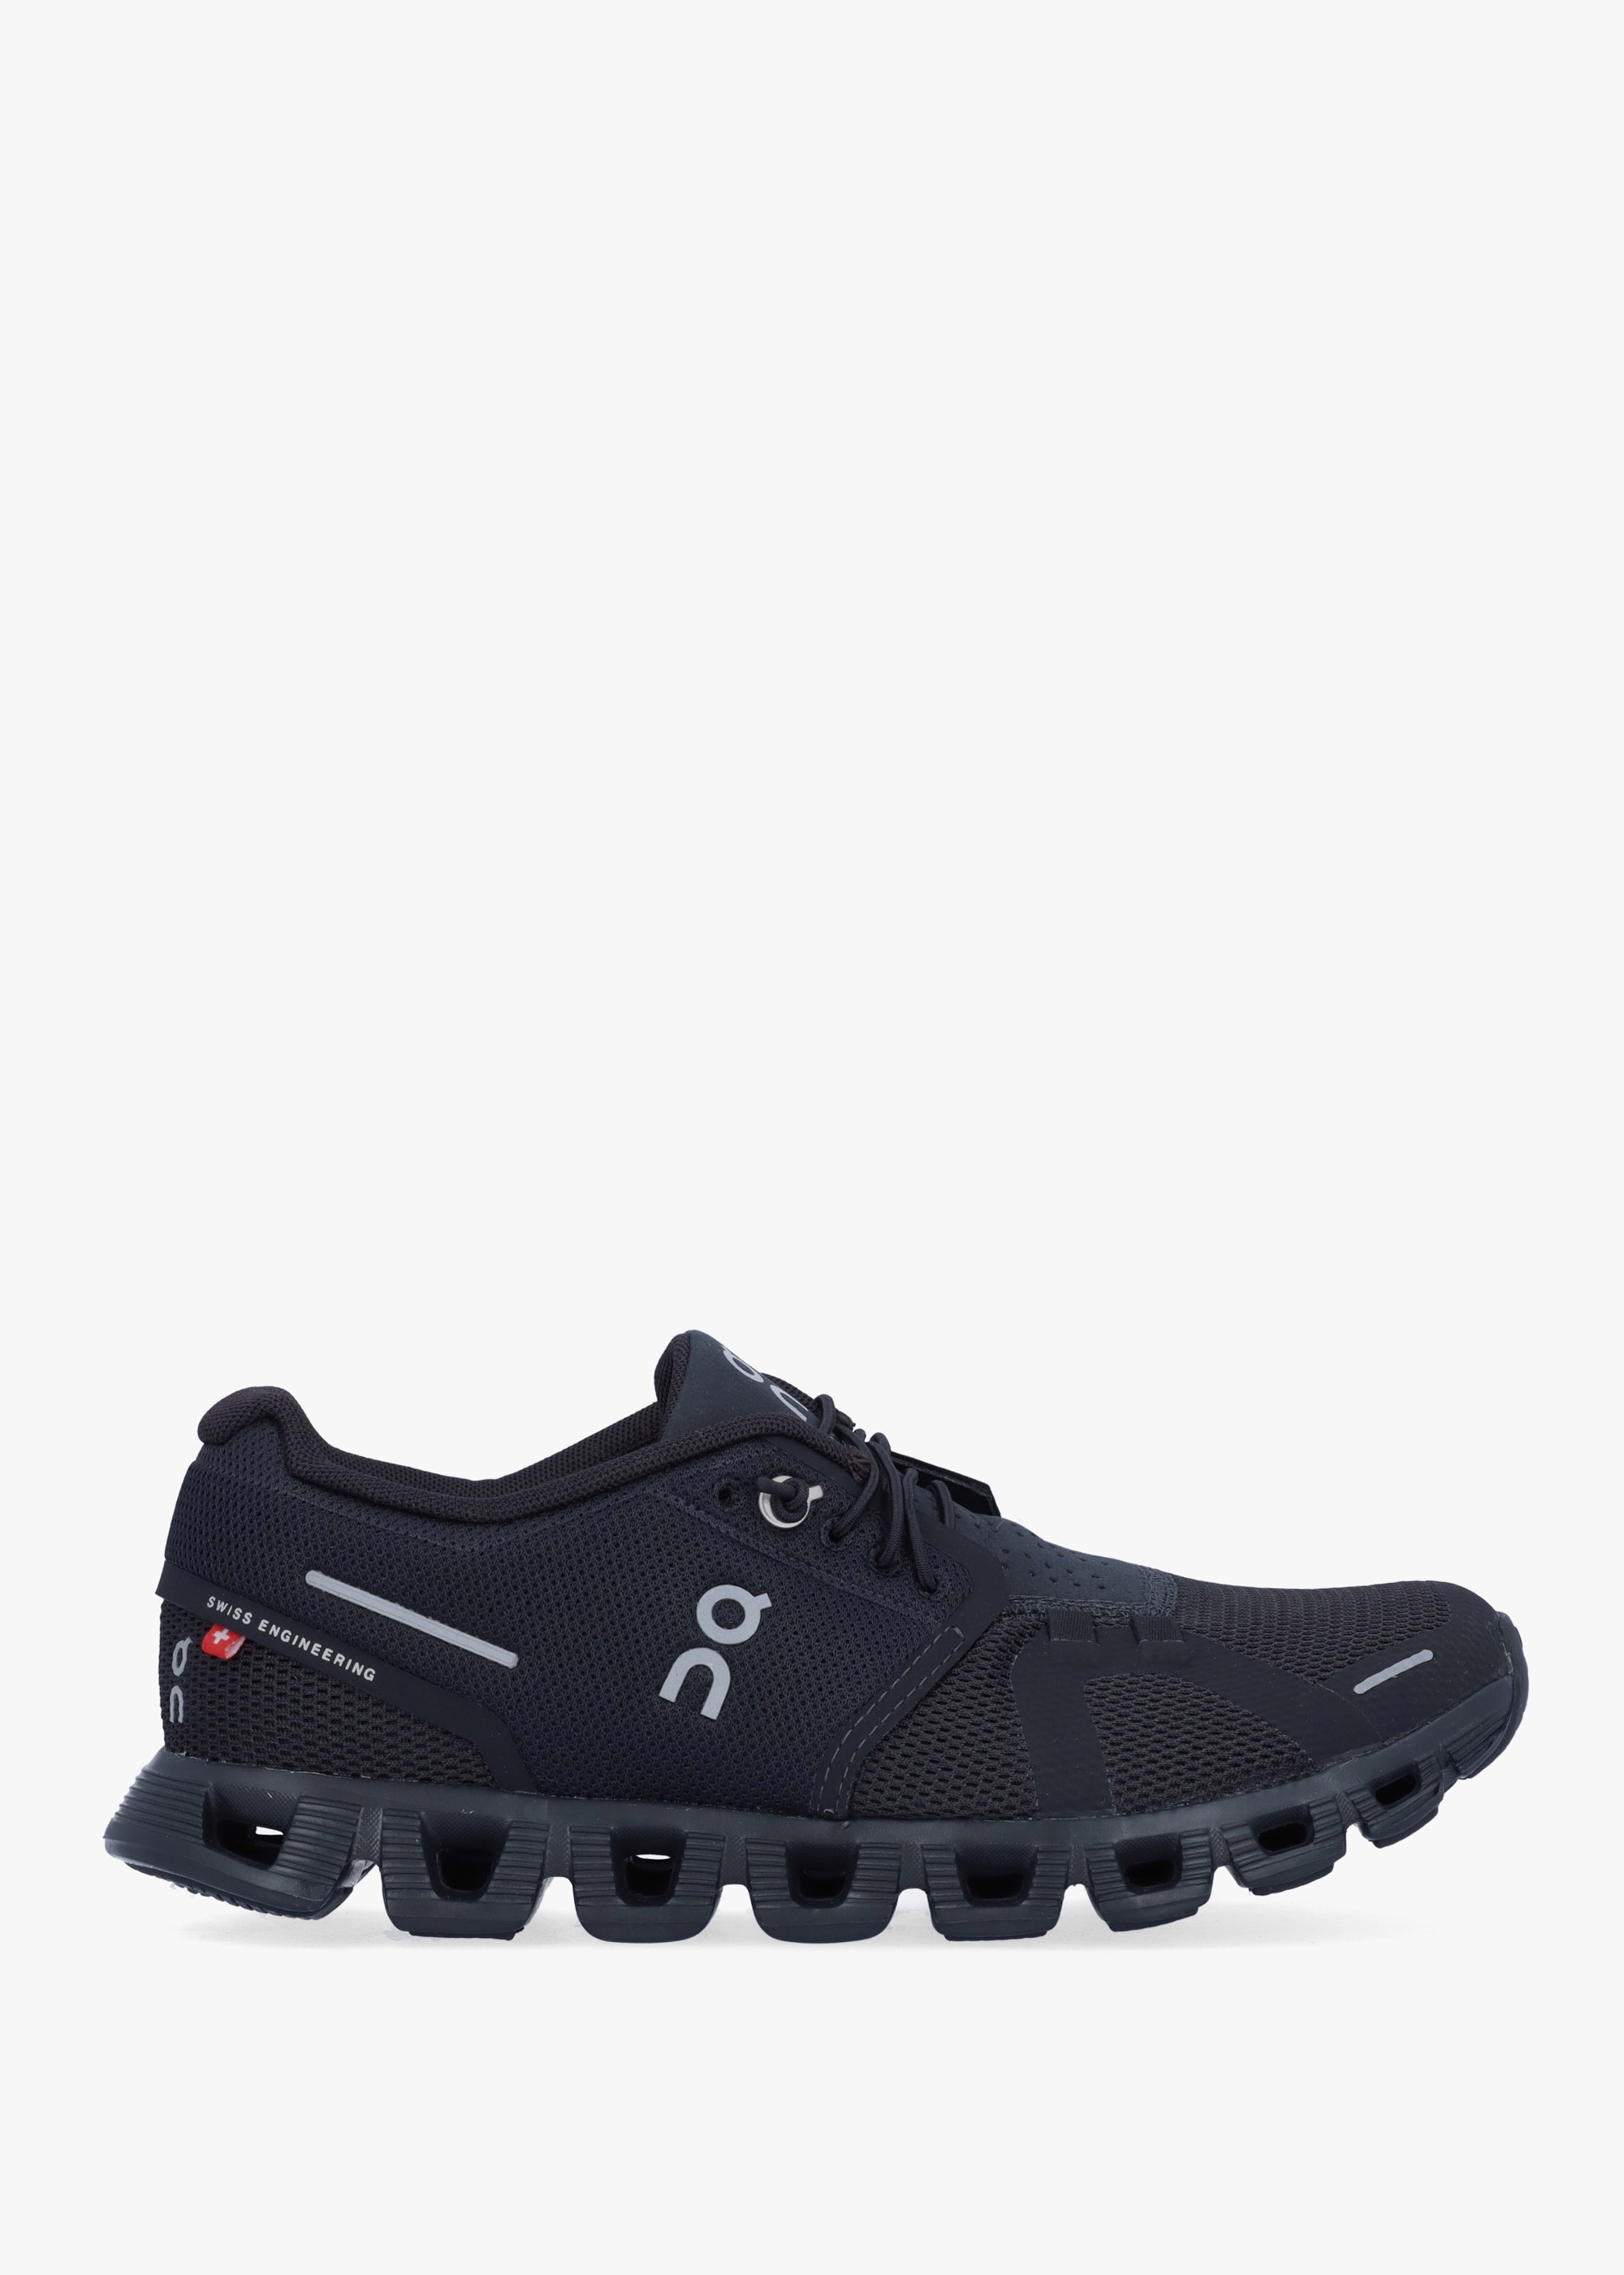 ON Running Womens Cloud 5 All Black Trainers